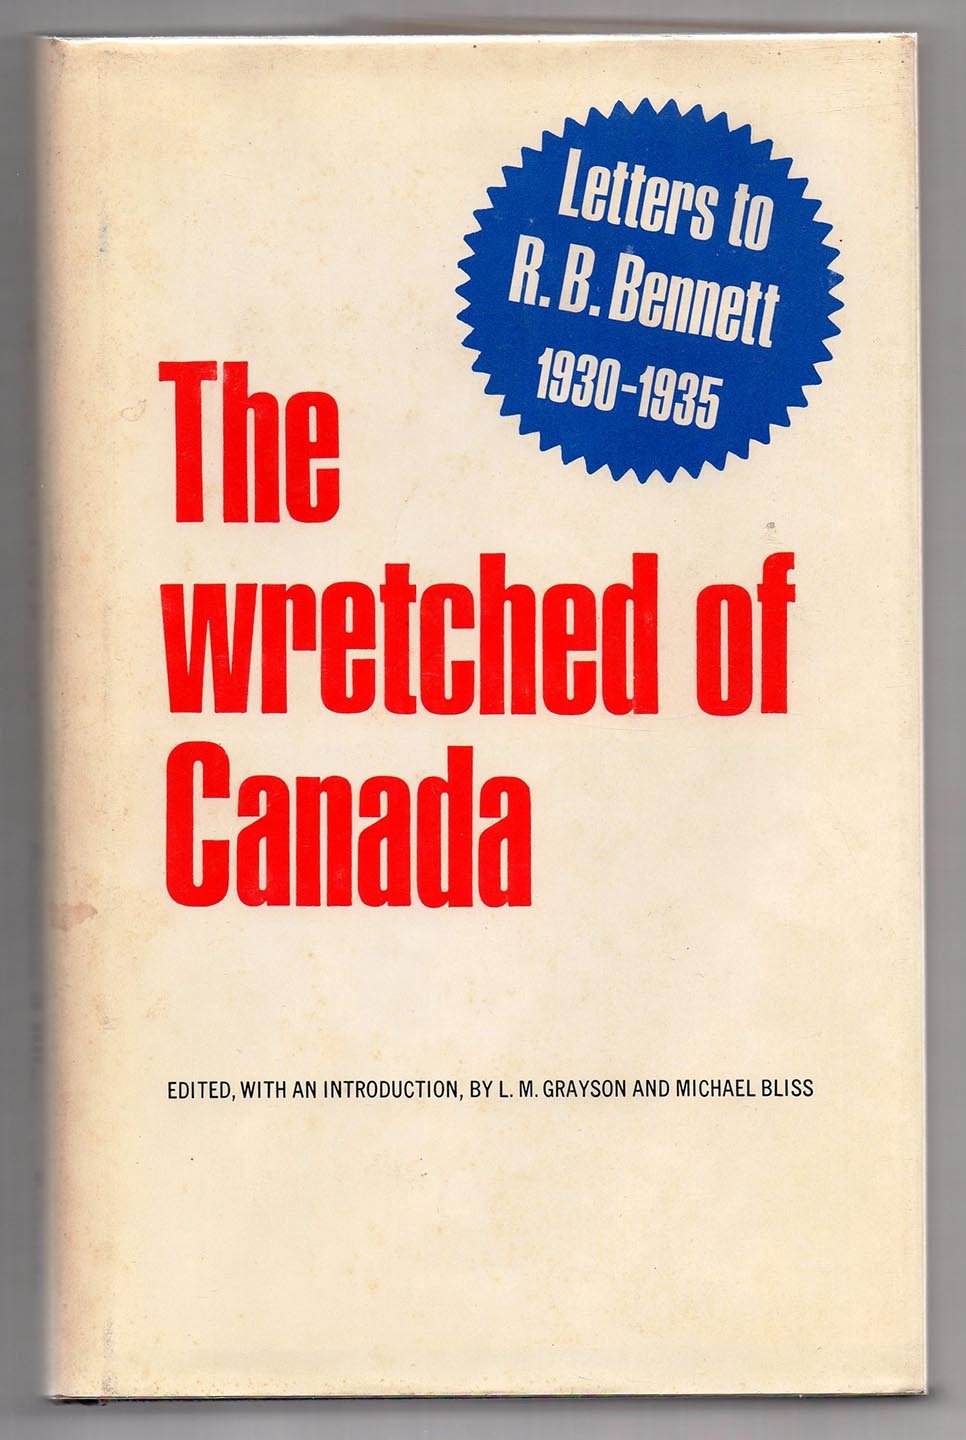 The Wretched of Canada: Letters to R. B. Bennett 1930-1935